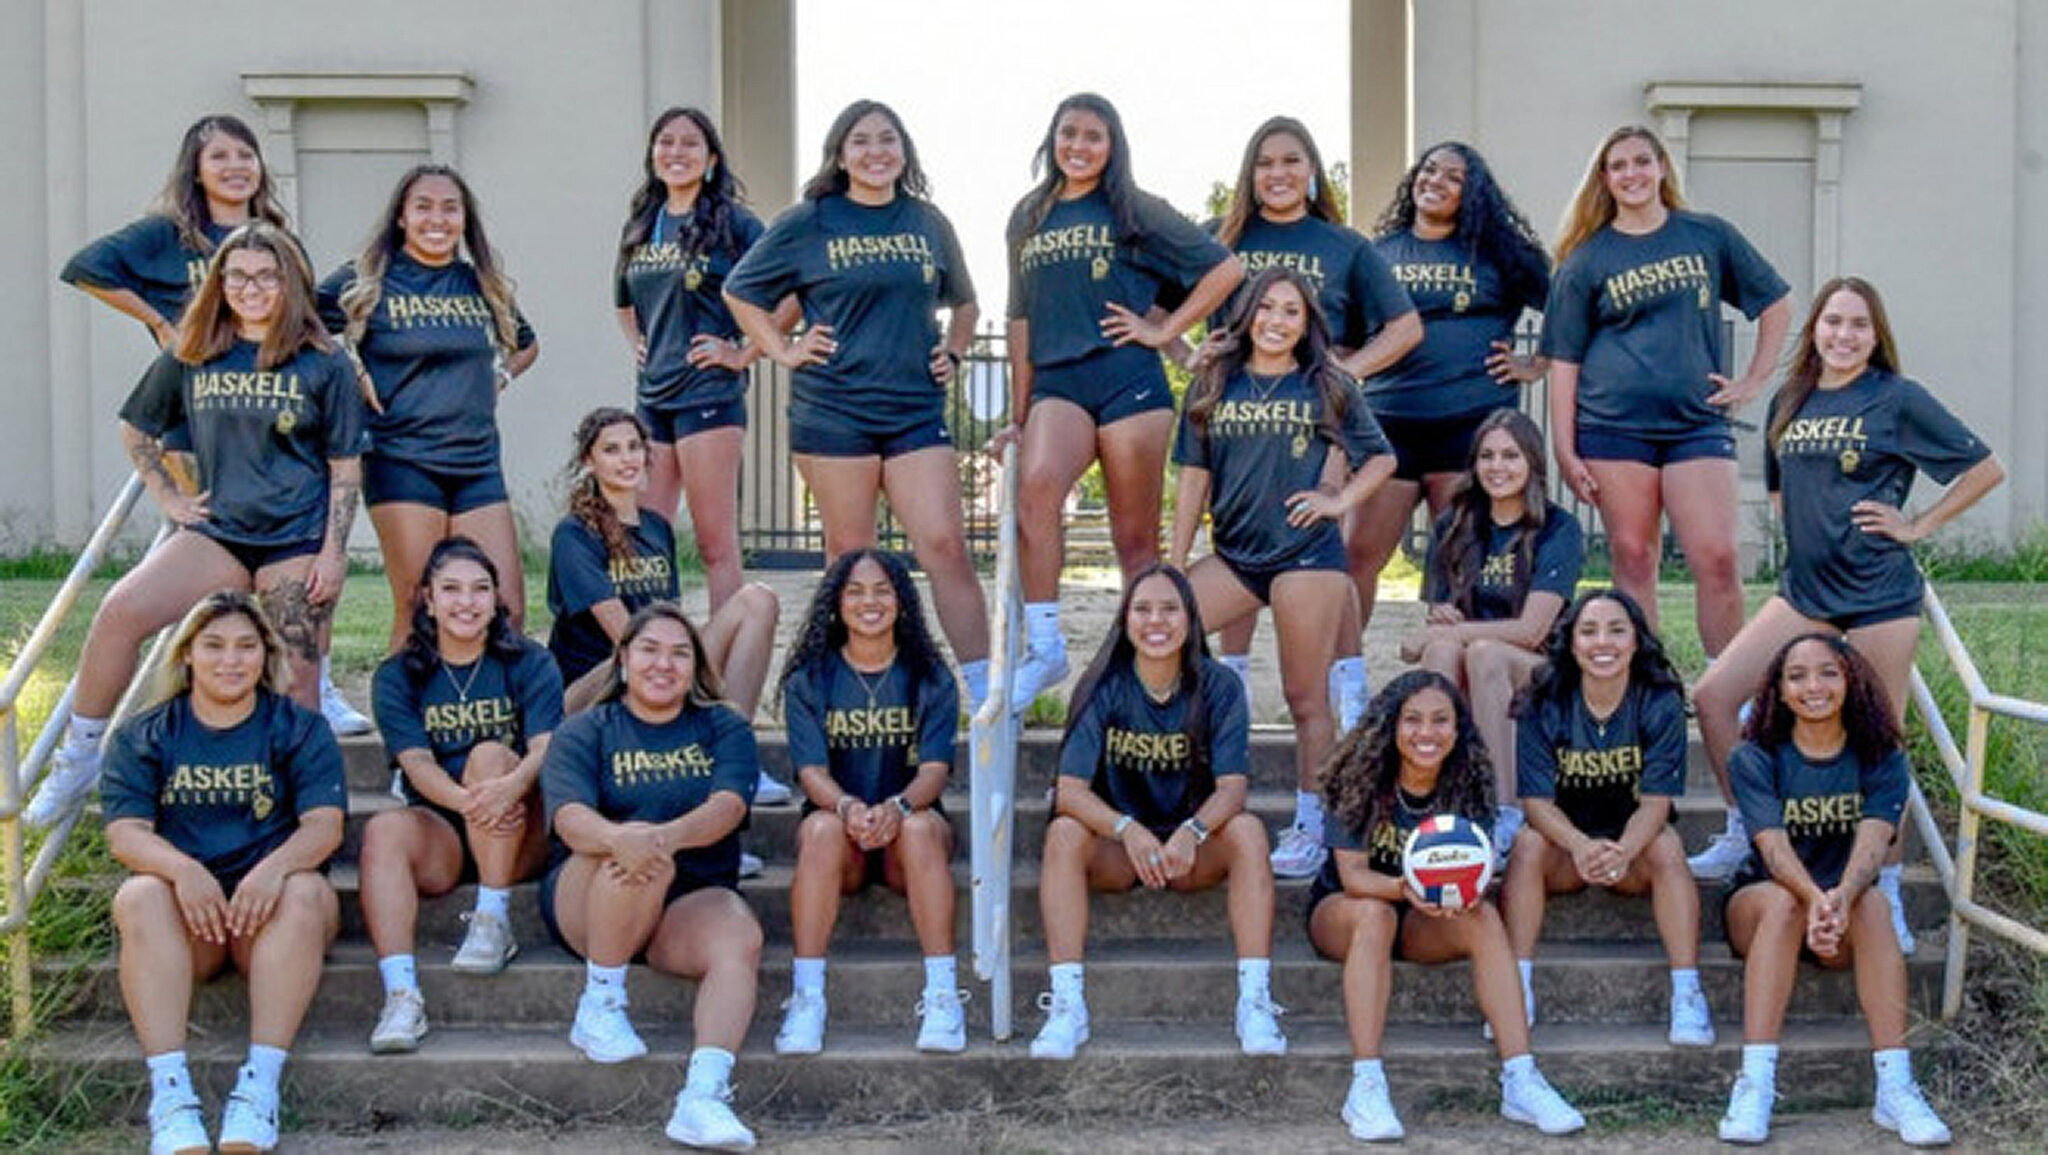 Haskell volleyball to play in Tampa area • The Seminole Tribune